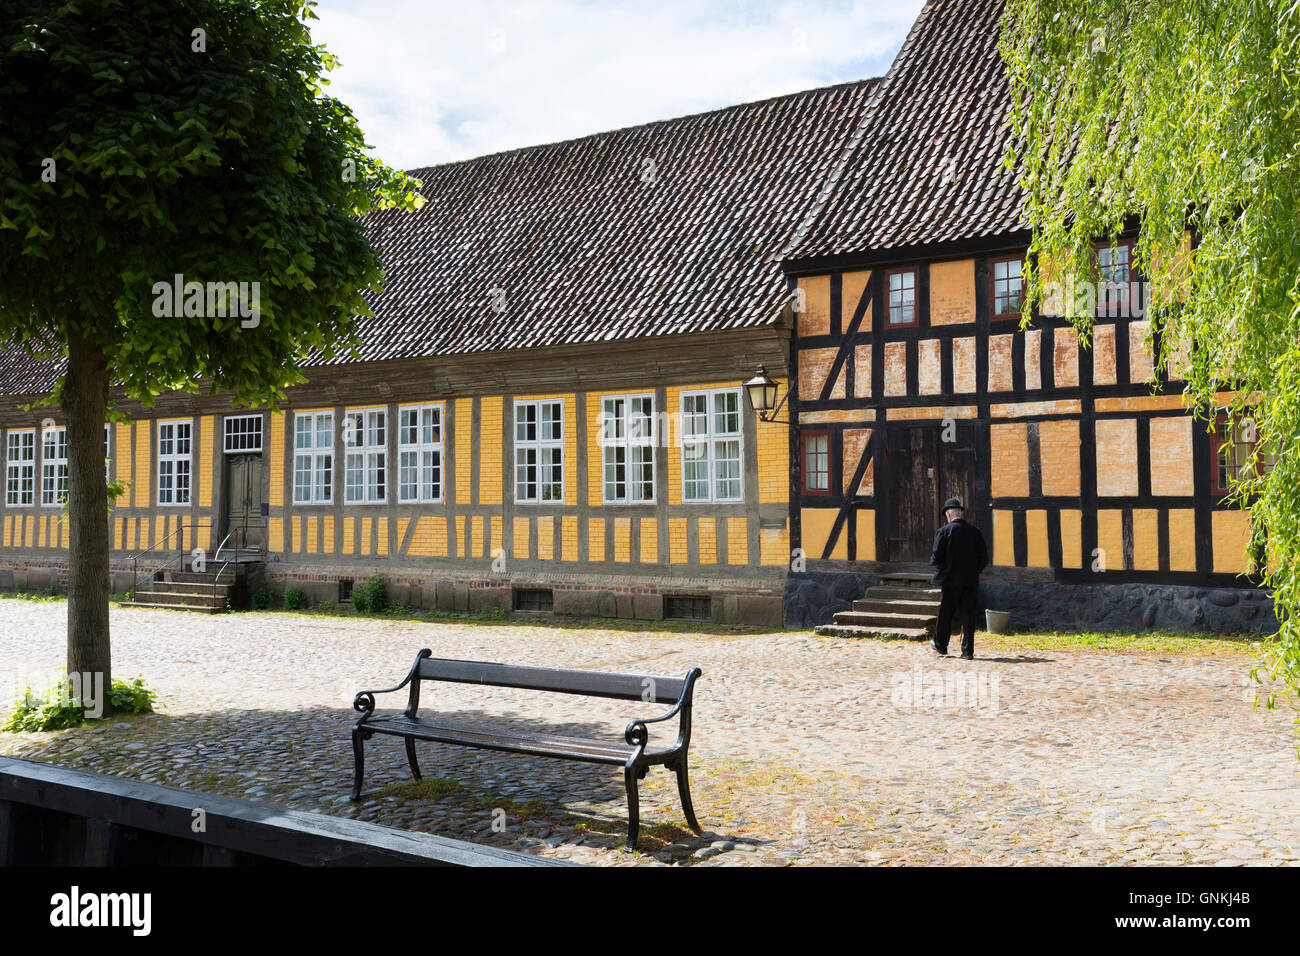 Half-timbered buildings at Den Gamle By, The Old Town, open-air folk museum at Aarhus,  East Jutland, Denmark Stock Photo